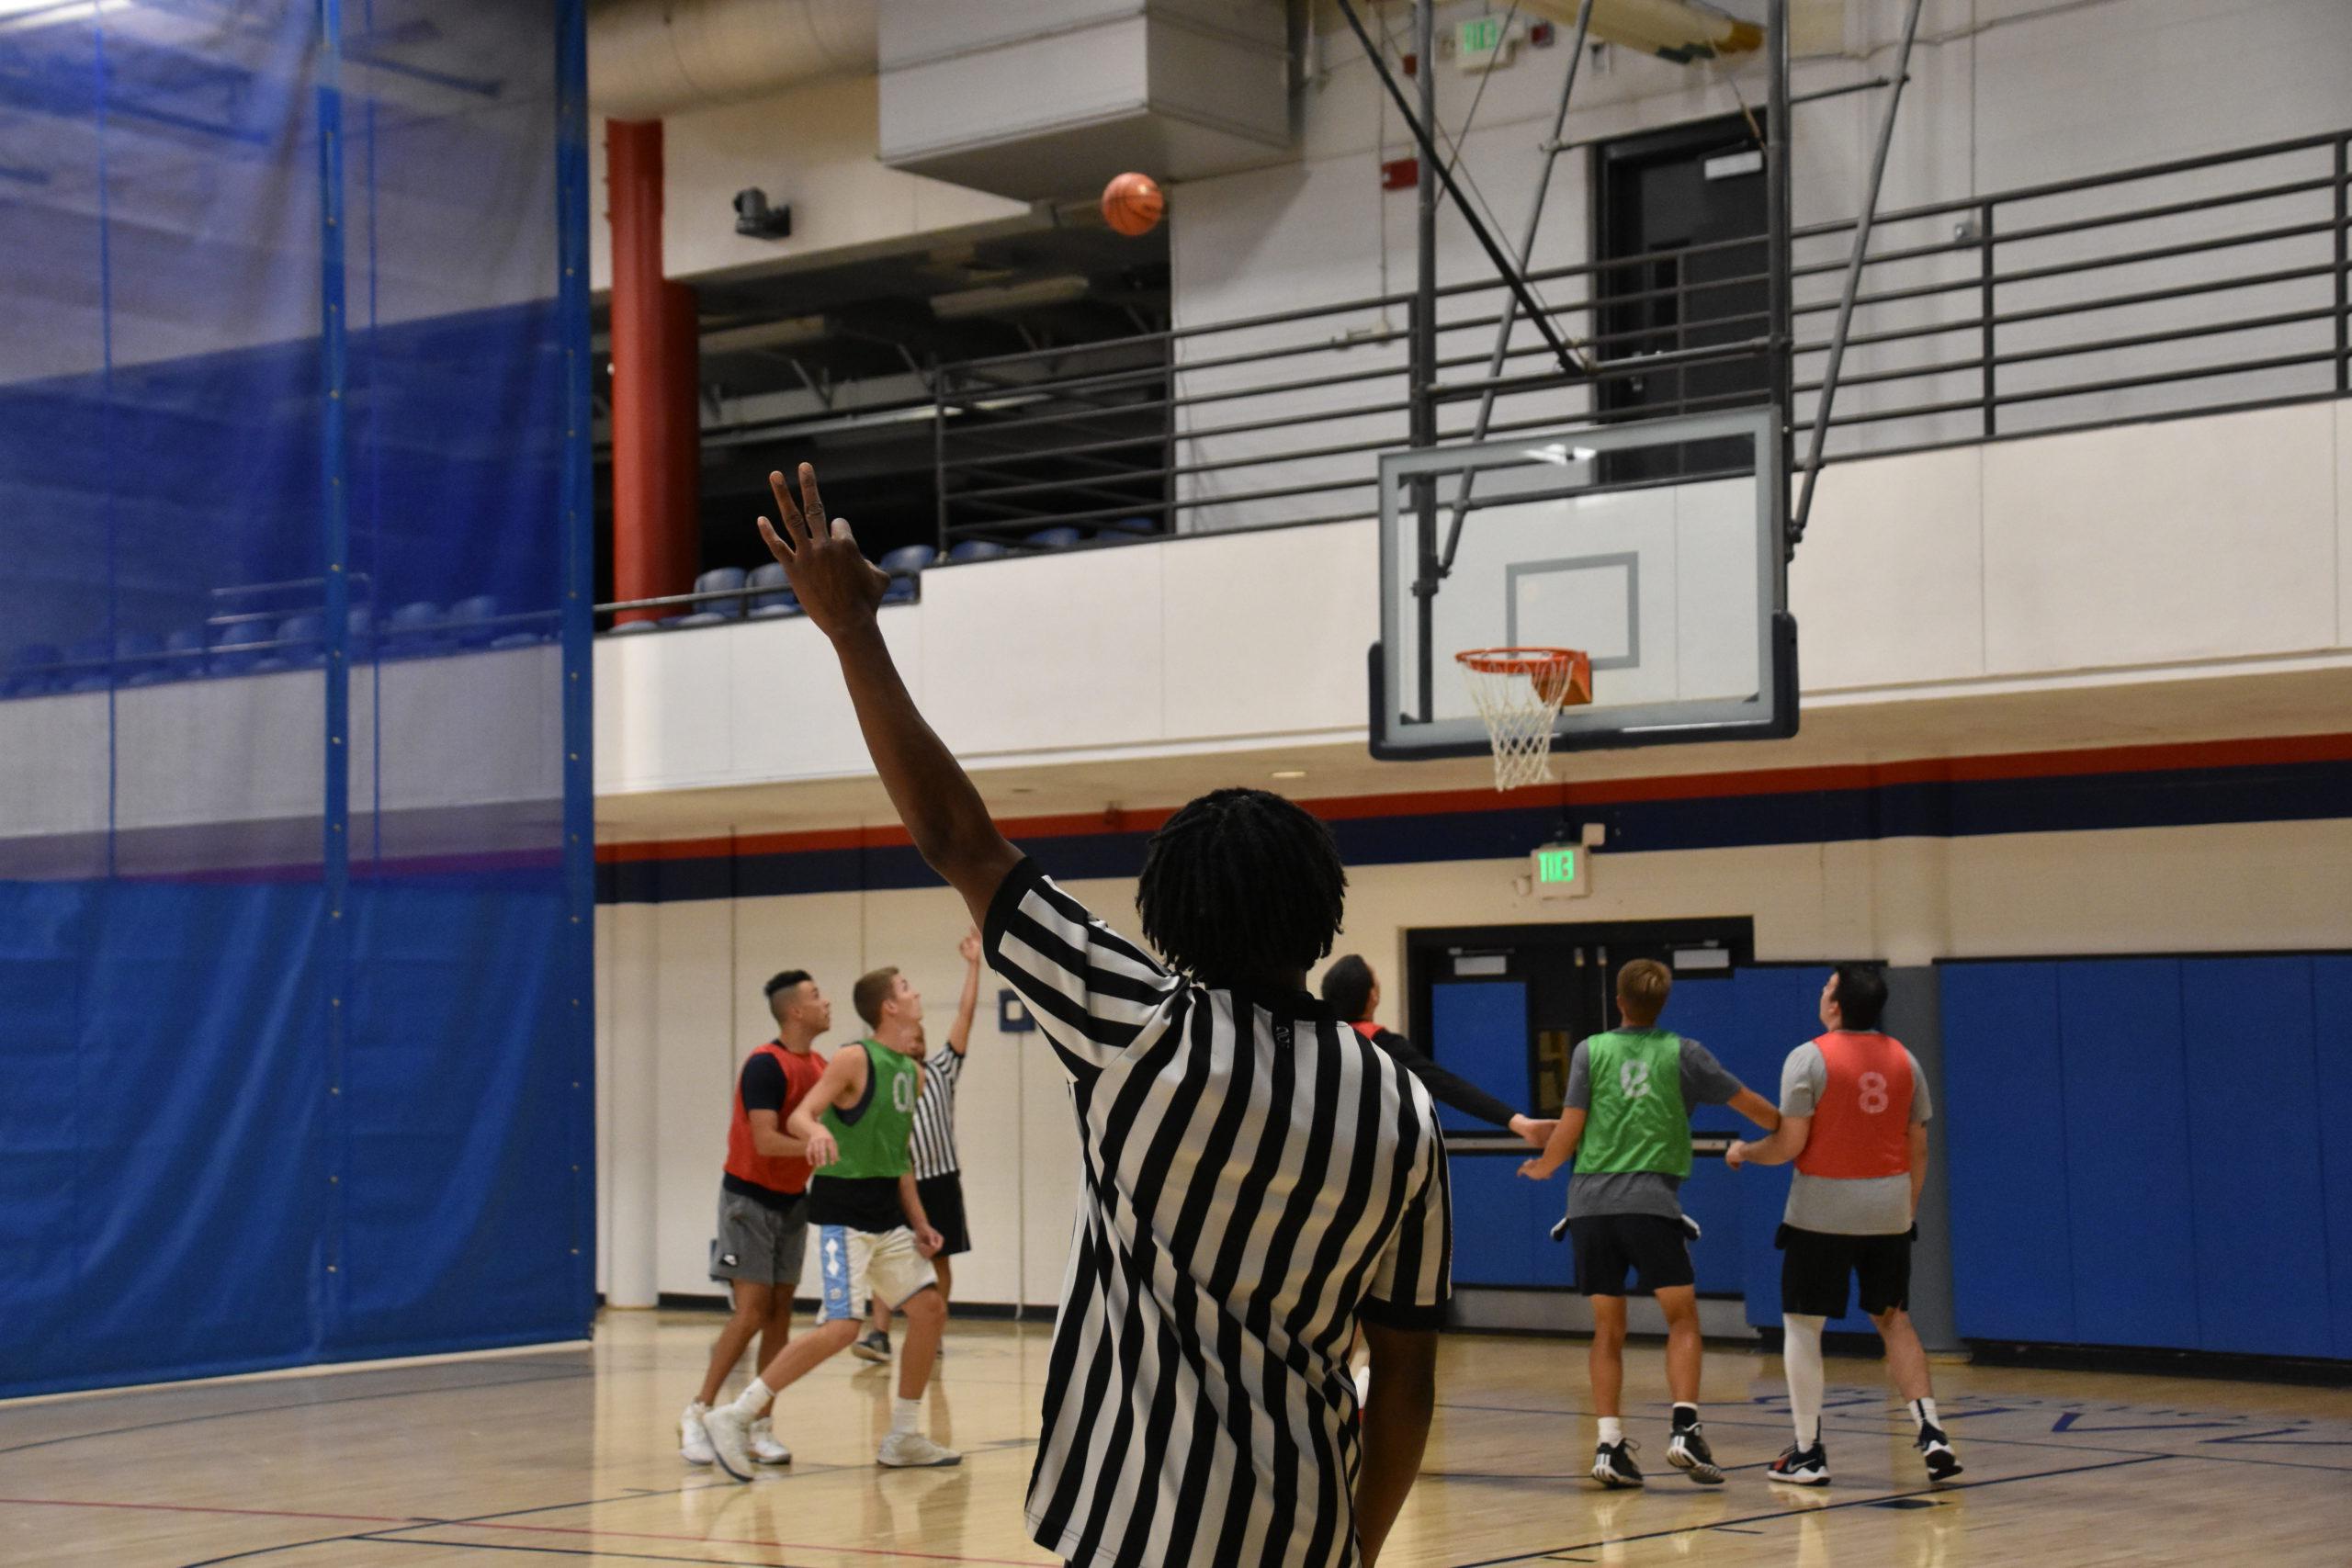 Intramural basketball official showing a 3 point attempt